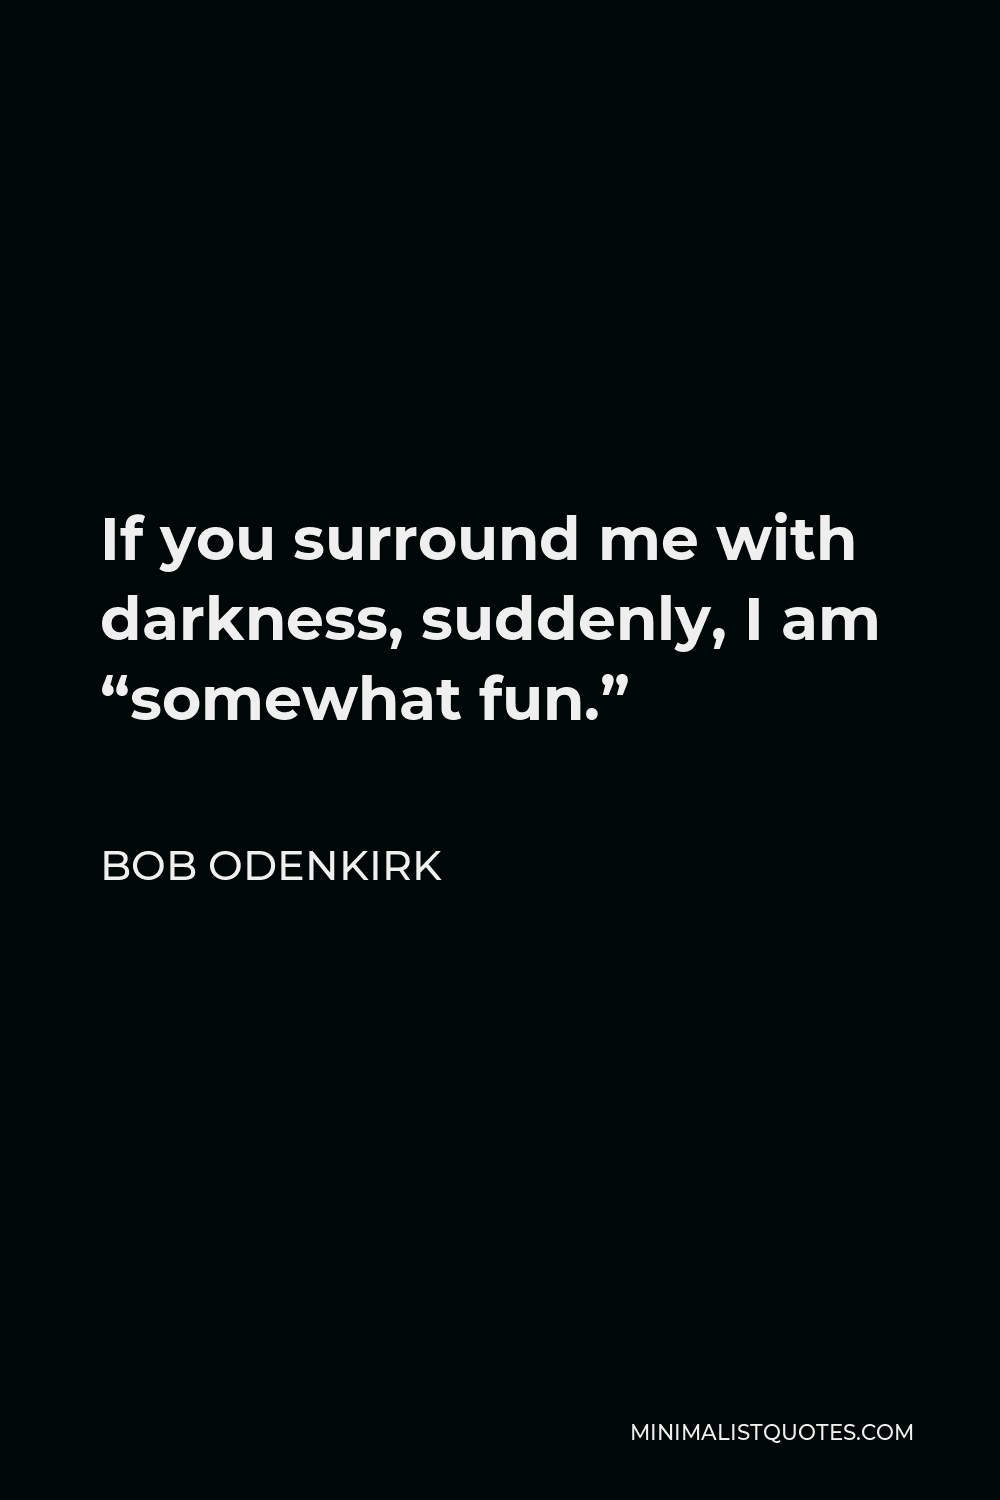 Bob Odenkirk Quote - If you surround me with darkness, suddenly, I am “somewhat fun.”